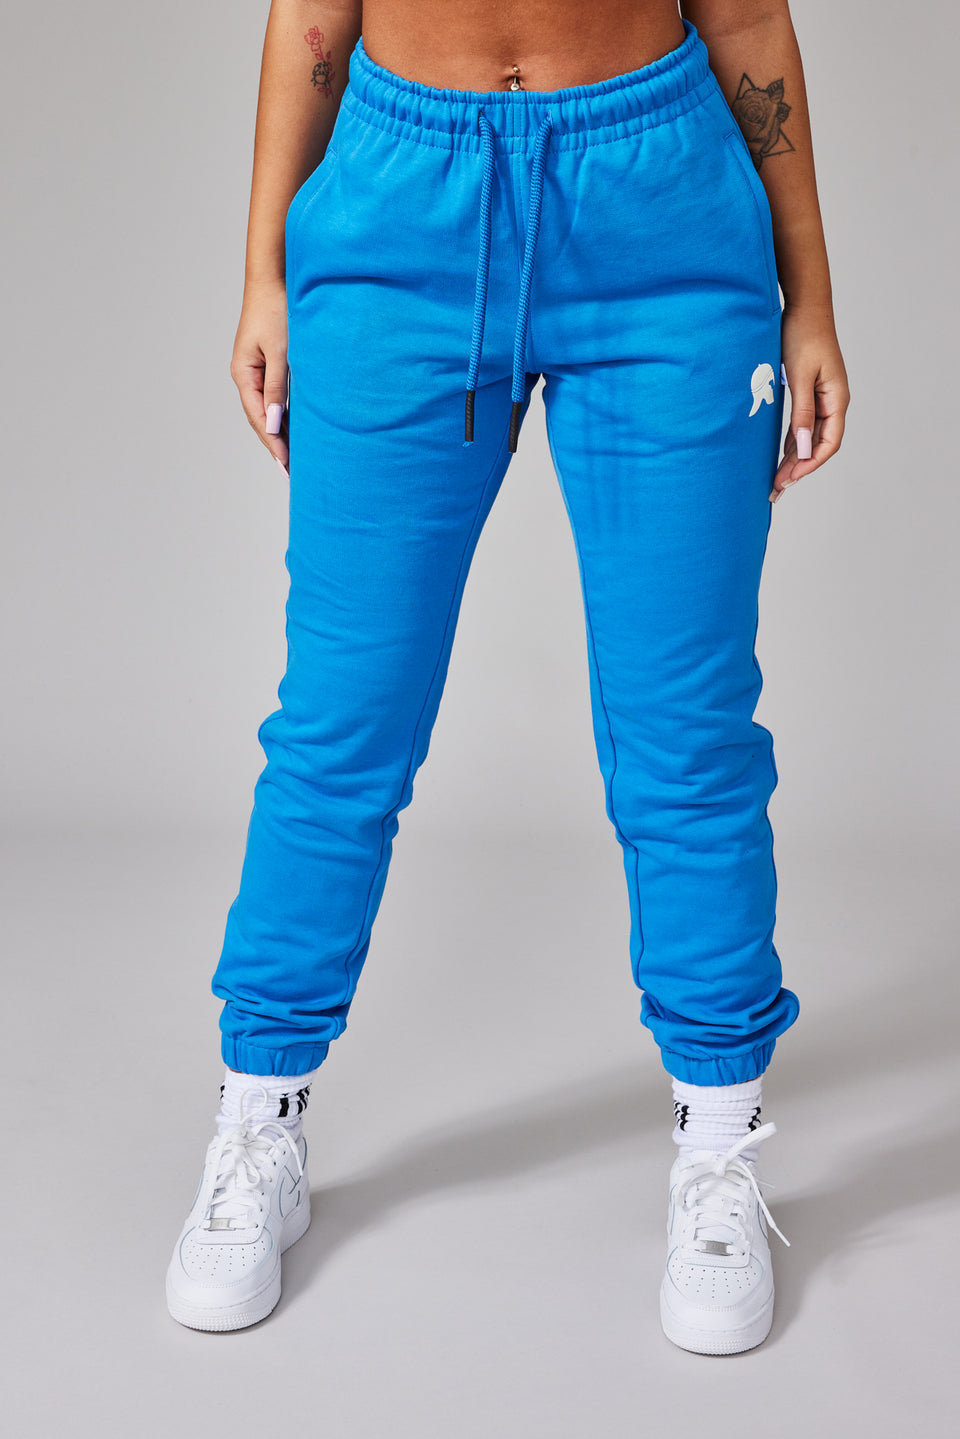 The Bloodline Joggers - Blue